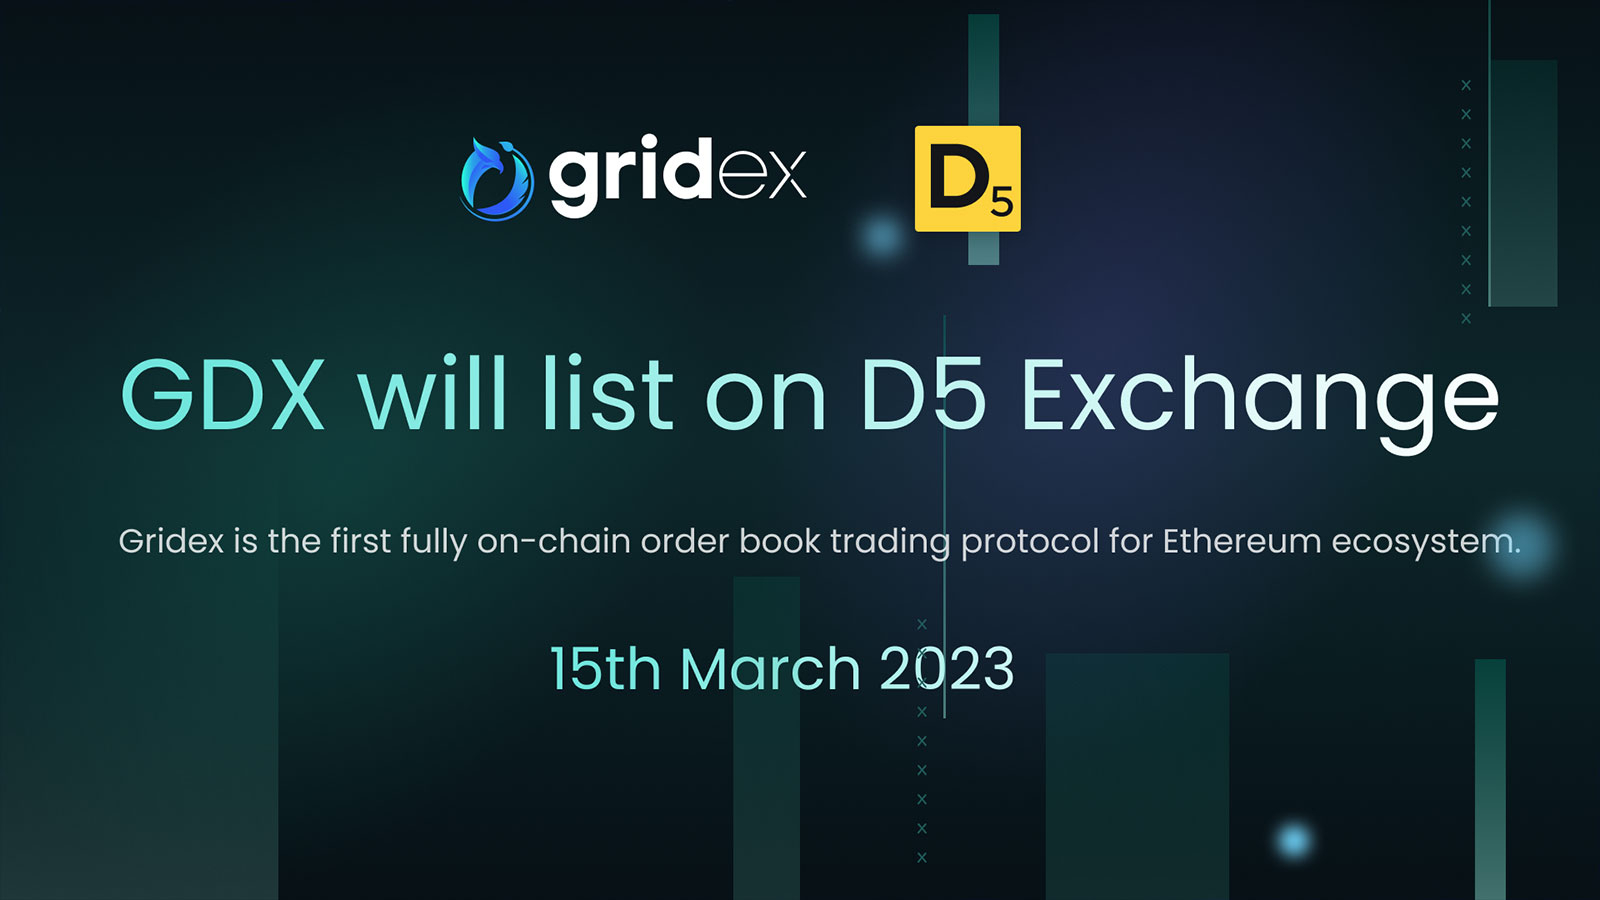 Gridex Protocol Set to Launch GDX Token on D5 Exchange This March 15th